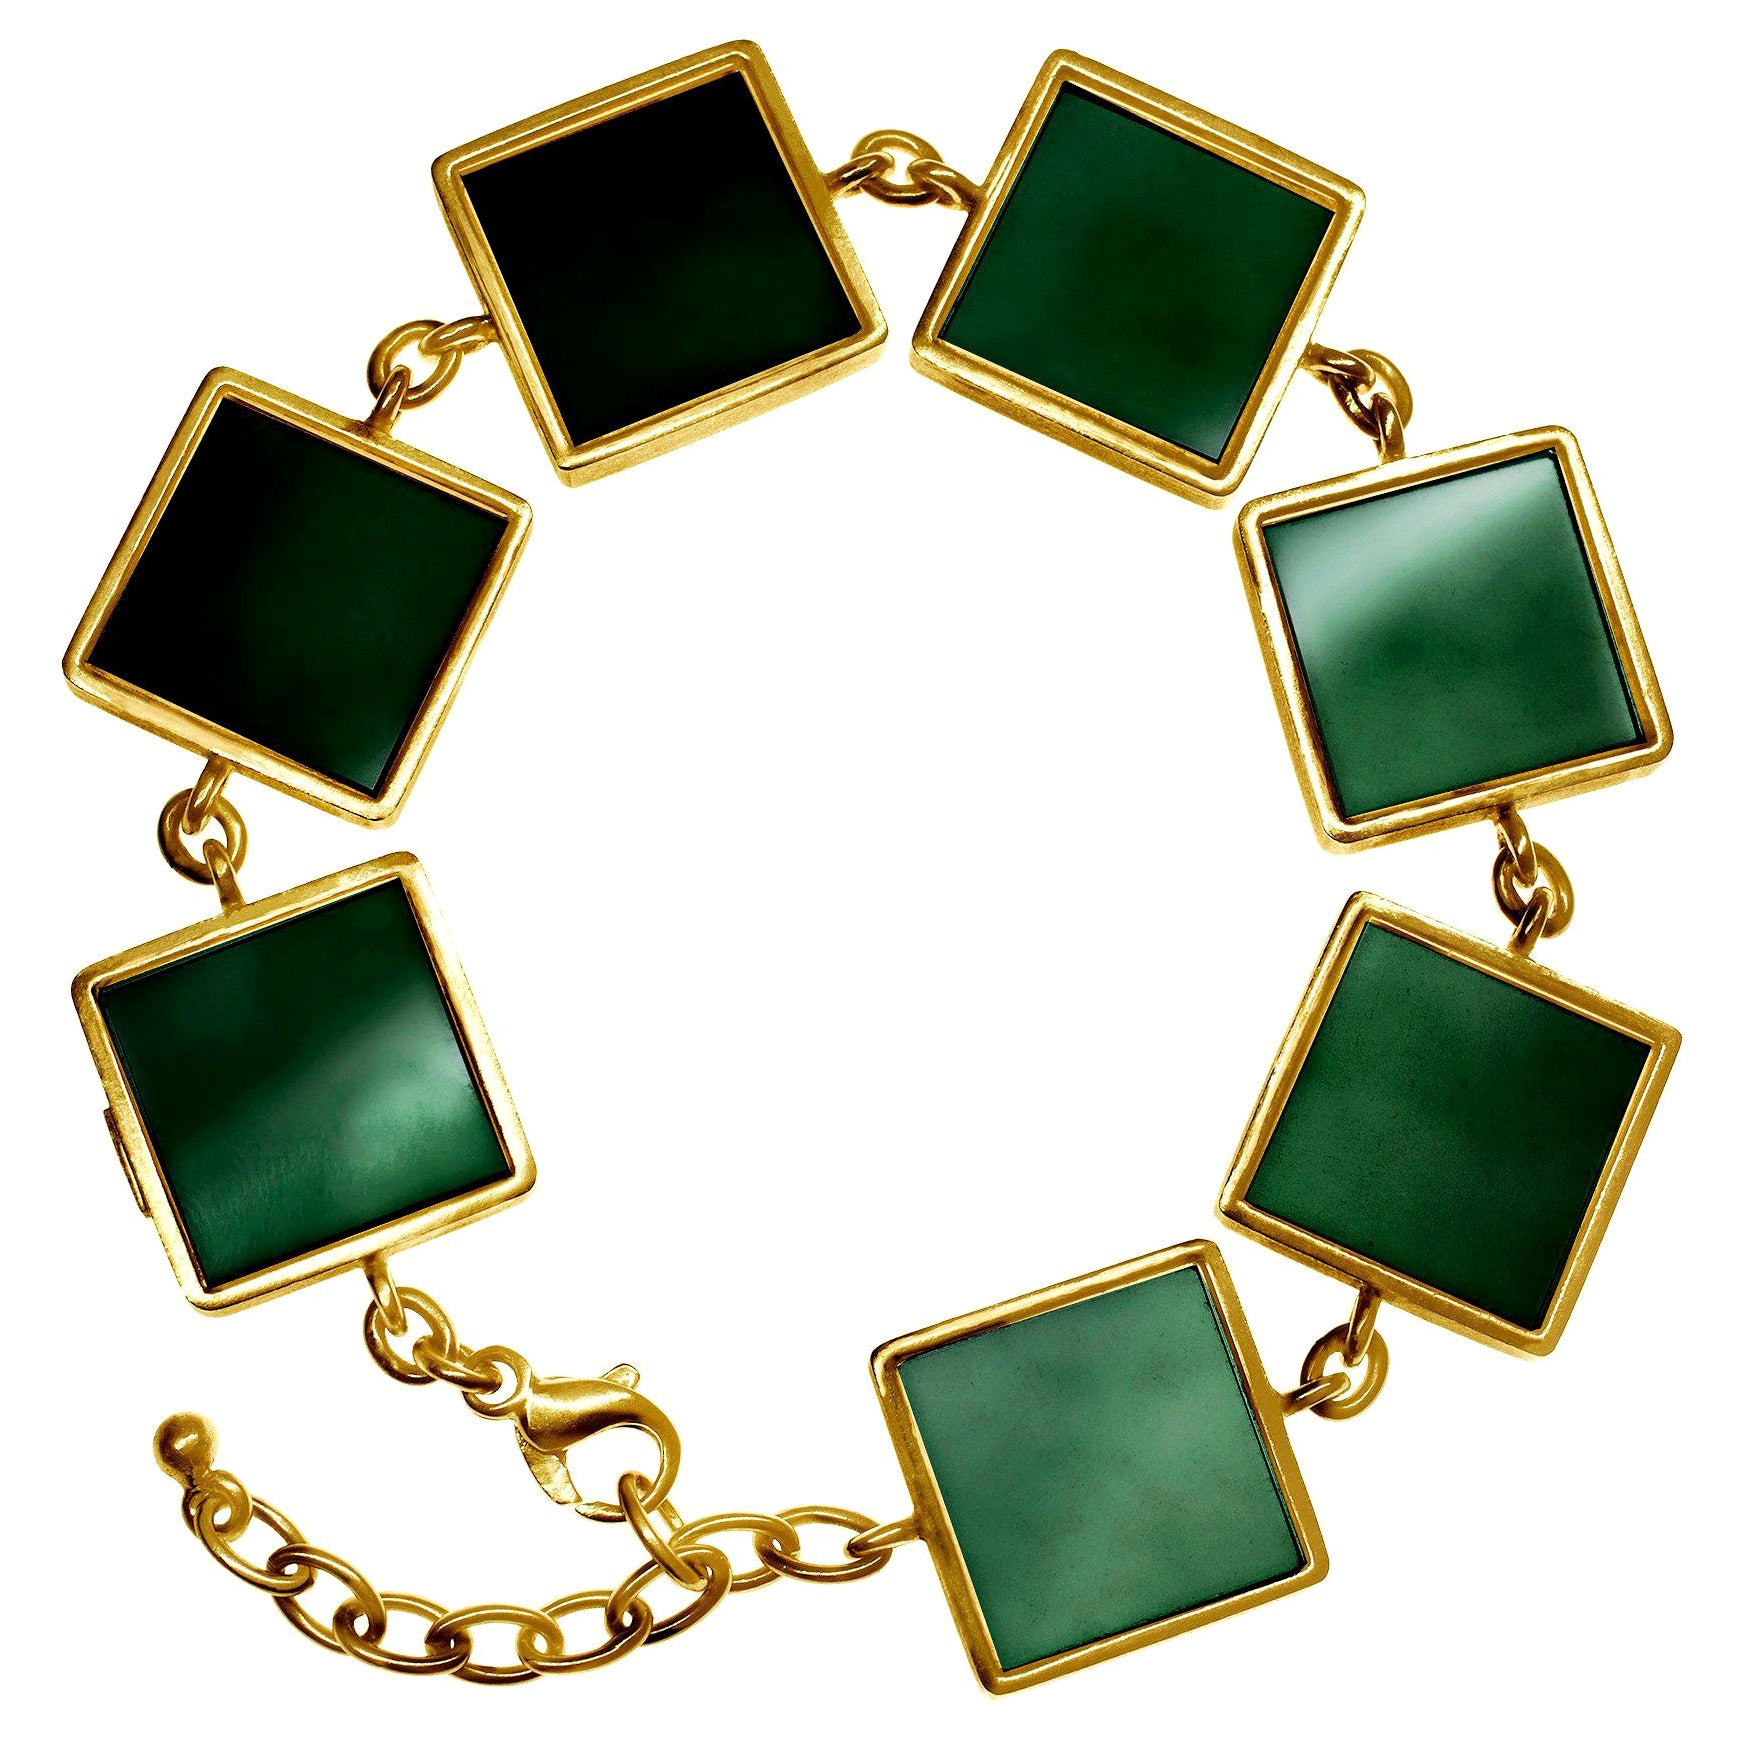 Featured in Vogue Yellow Gold Art Deco Style Bracelet with Dark Green Quartz For Sale